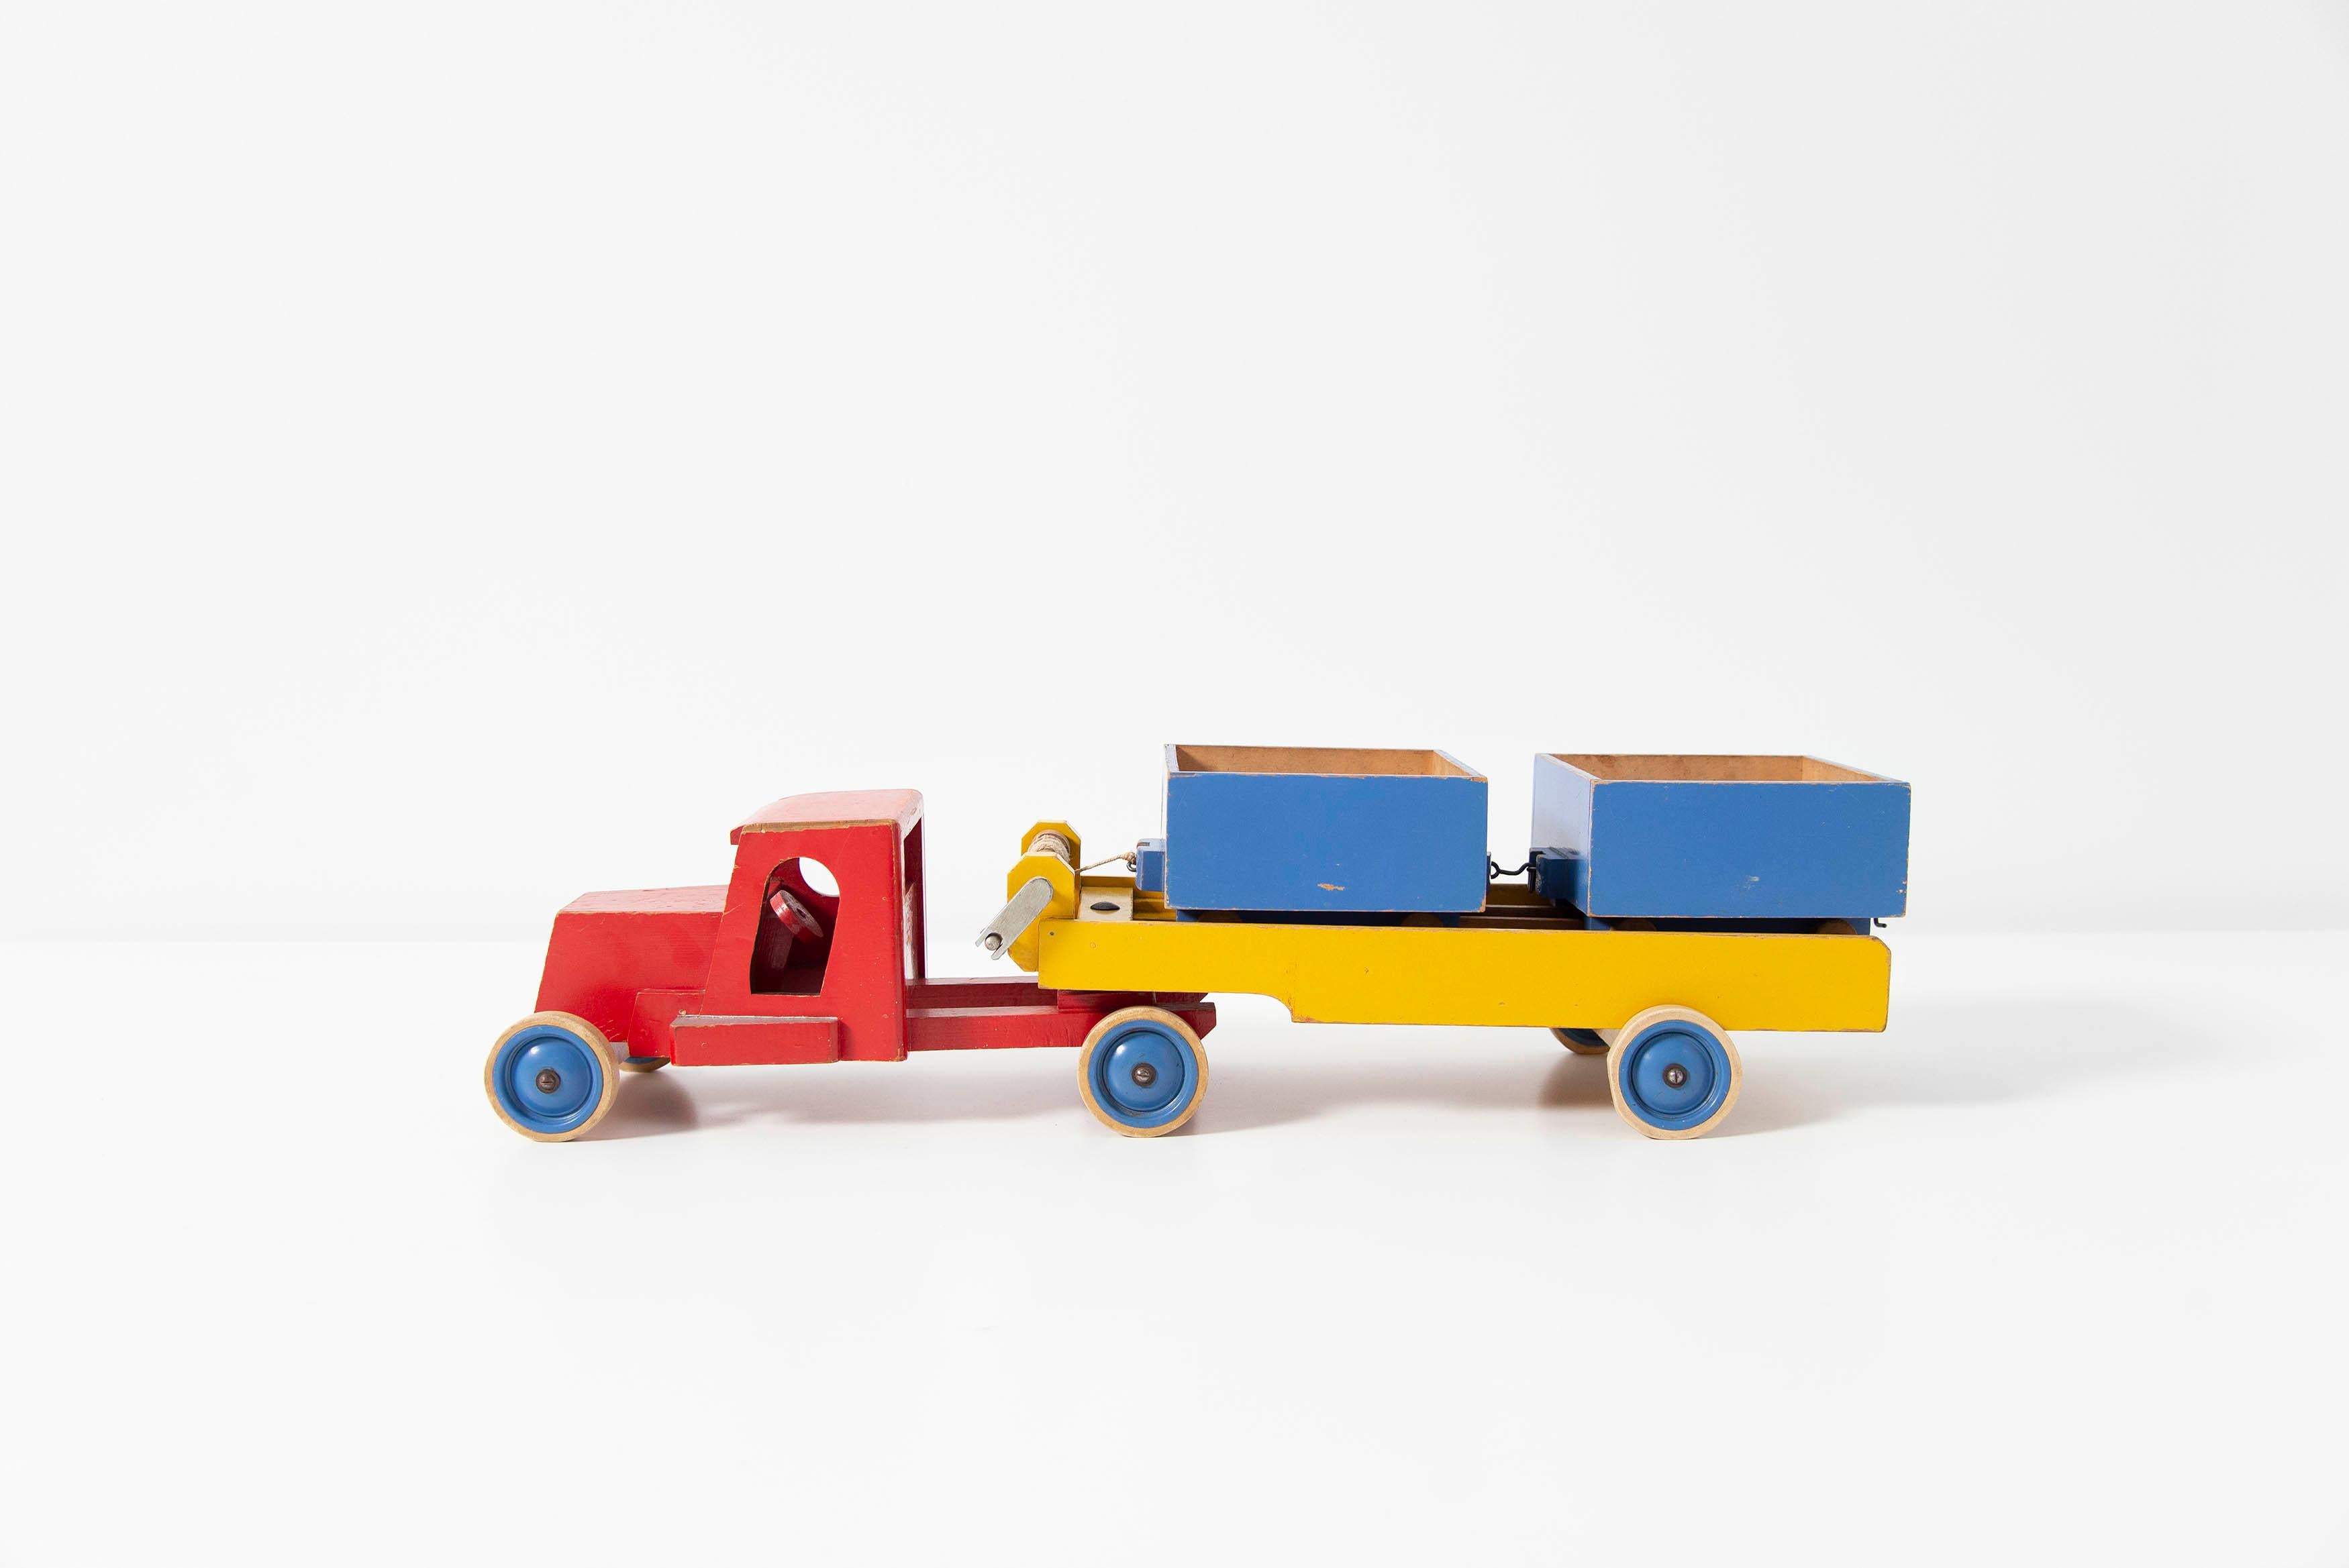 Rare collectible toy large toy truck designed by Ko Verzuu for Ado Holland in 1950. Ado means Arbeid door onvolwaardigen, translated; labor by incapacitated, which makes this an even more special piece. Toys by Ado are being highly collected at the